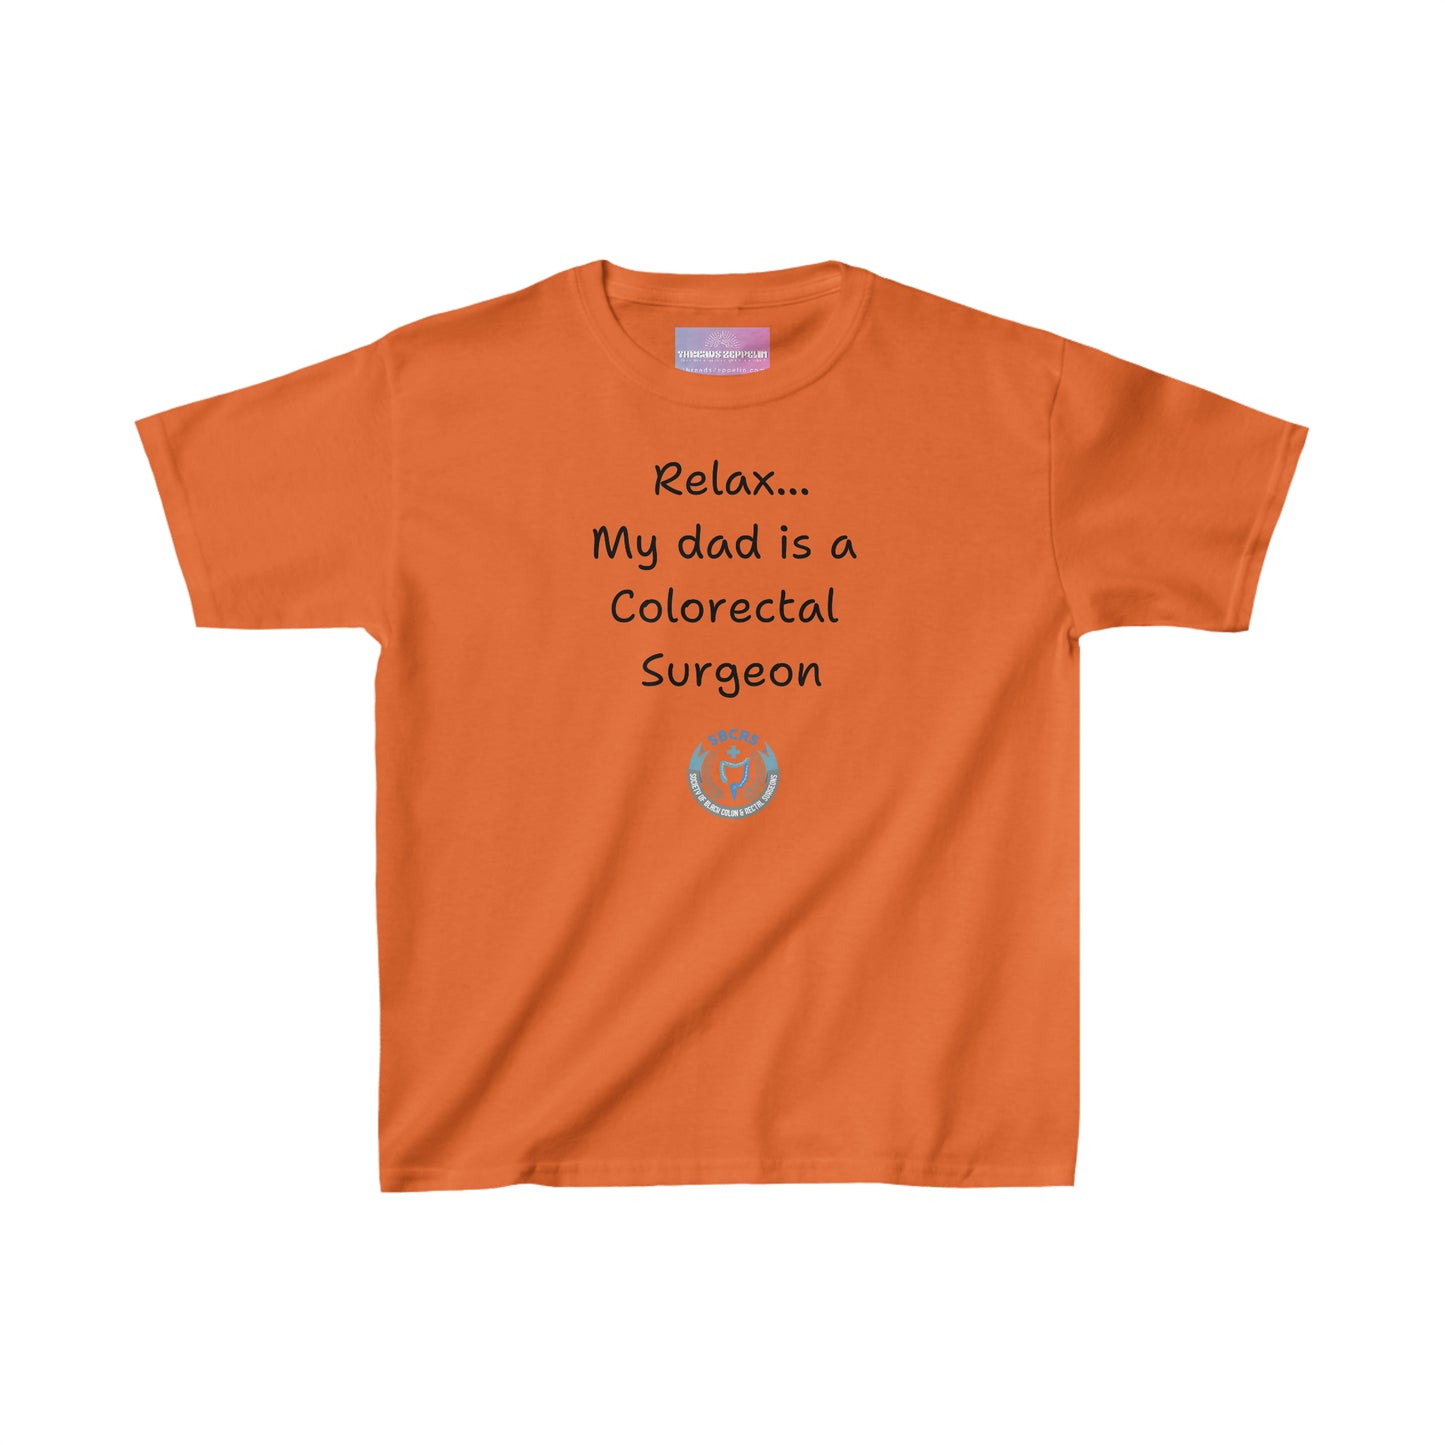 Relax, My Dad is a Colorectal Surgeon, Kids Heavy Cotton Tee